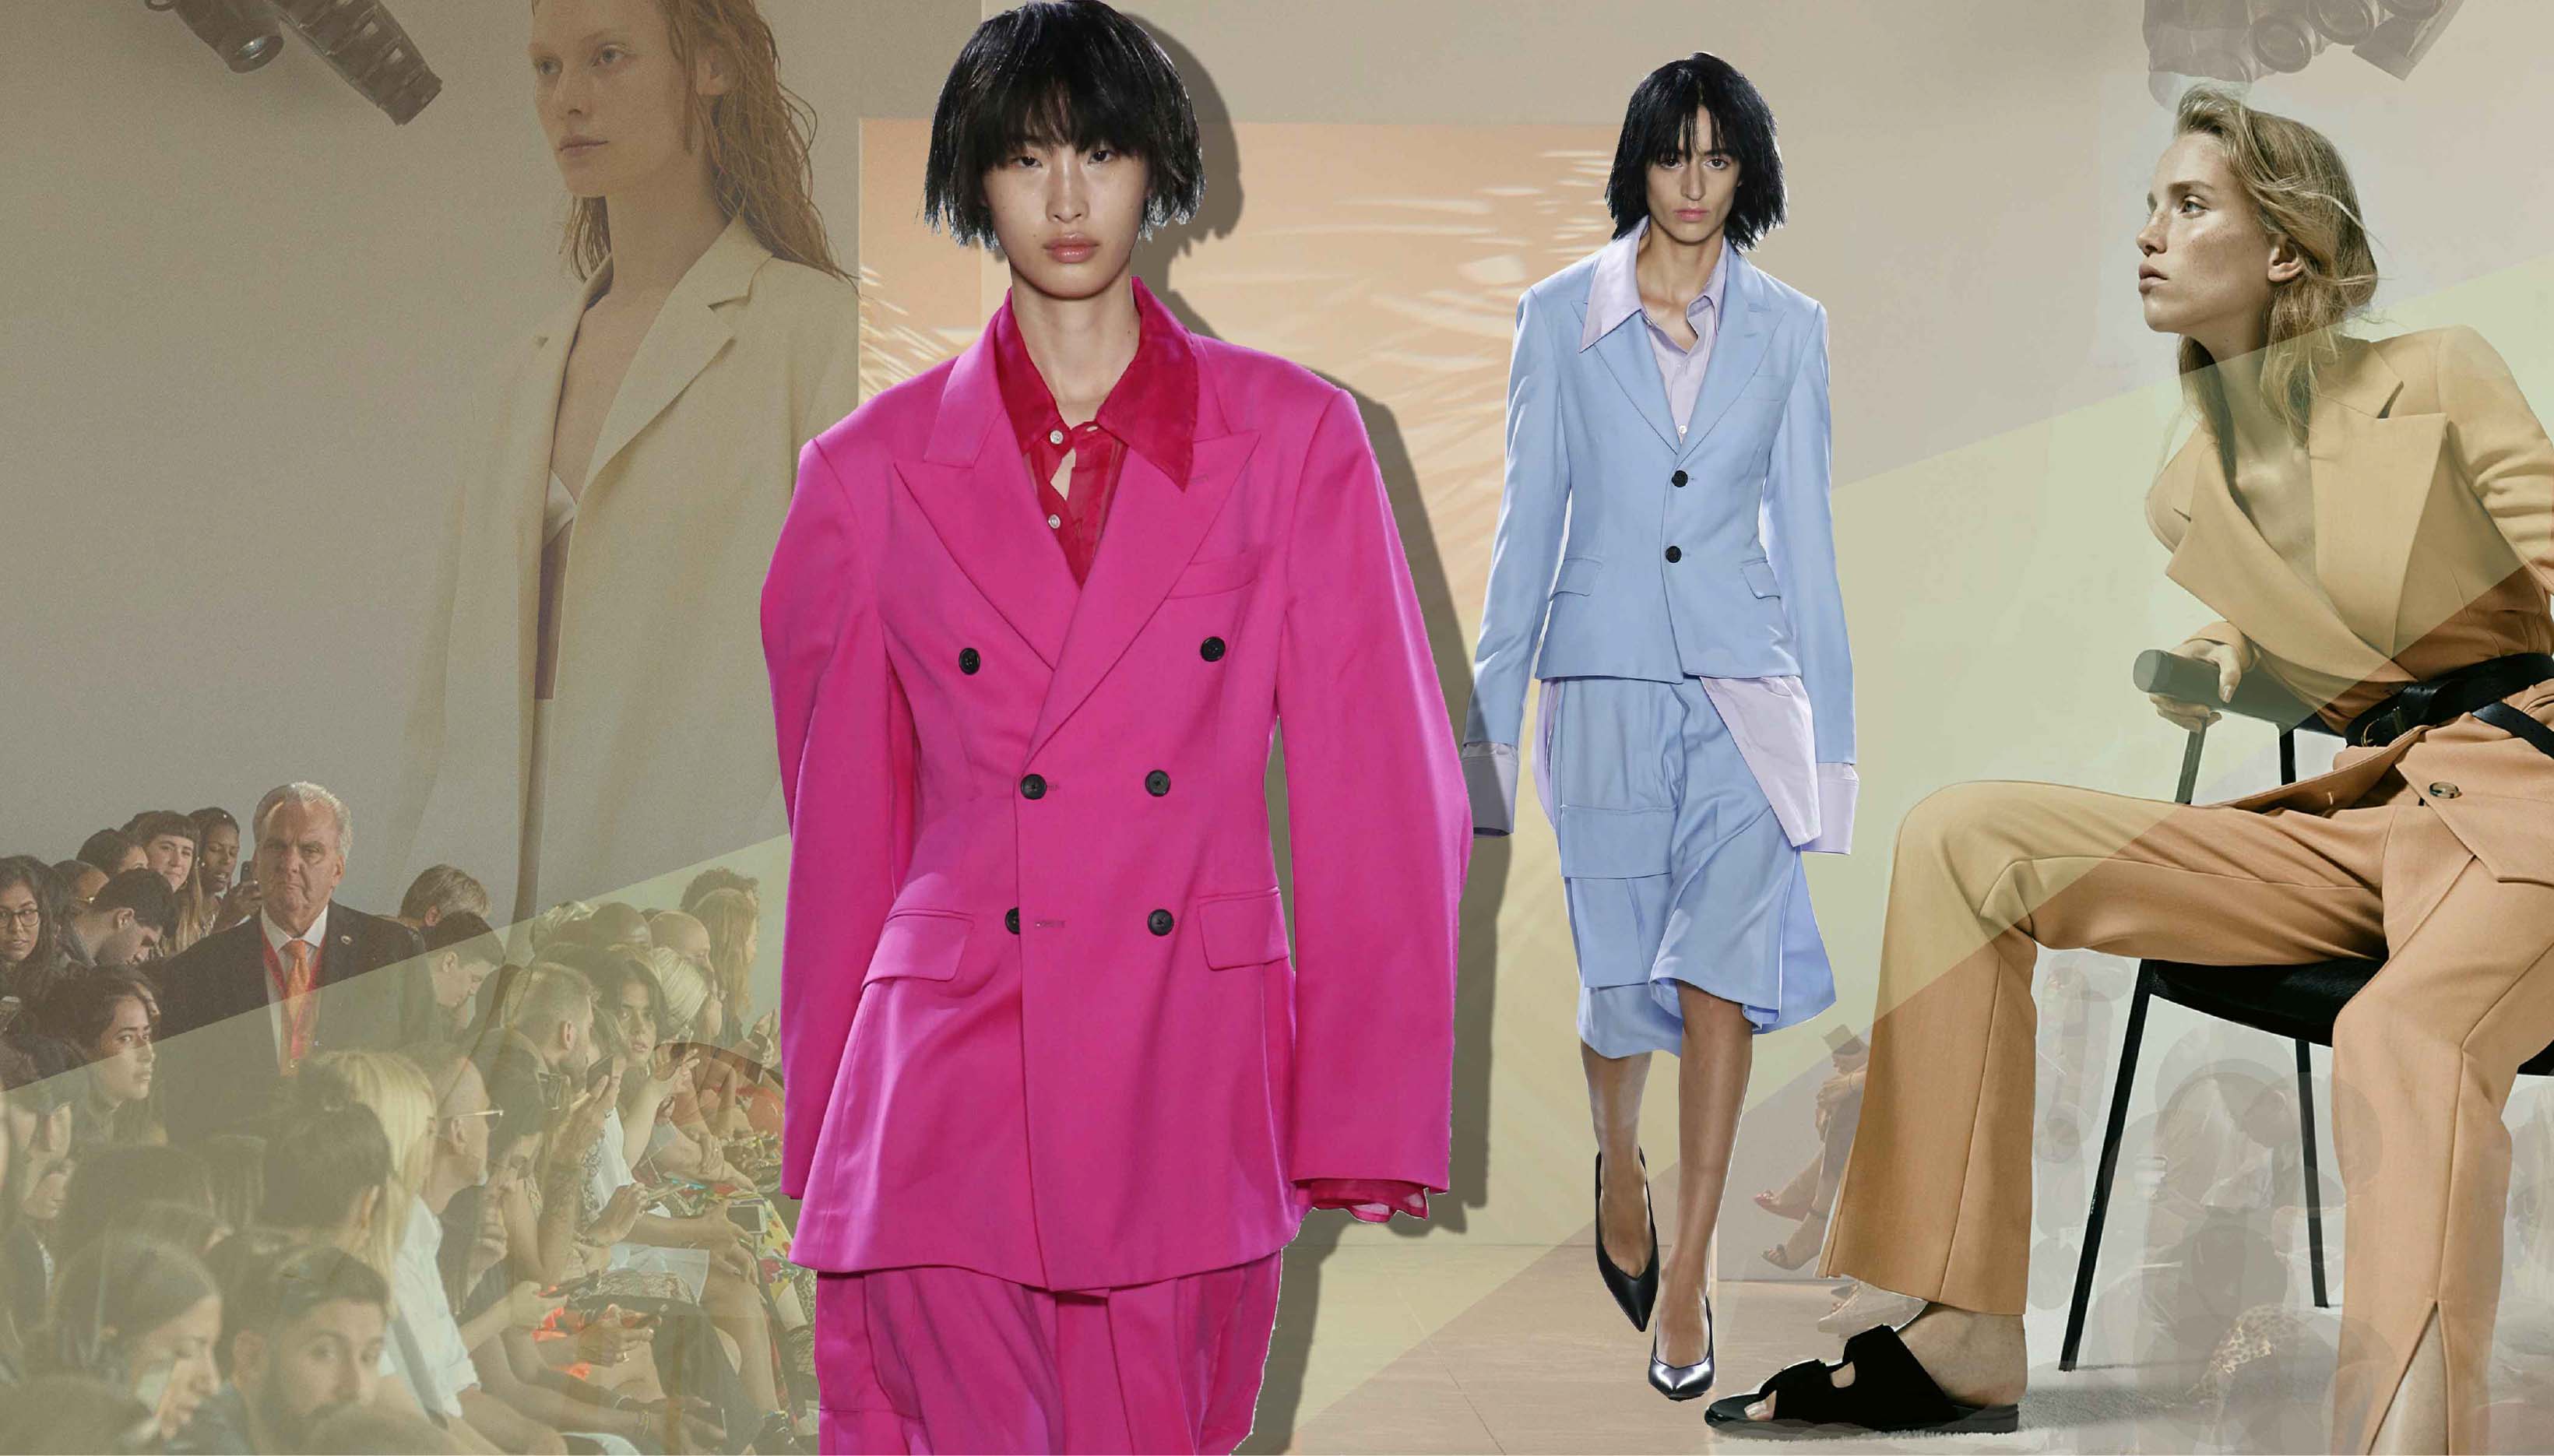 Colorful World -- 2019 S/S Women's Suit of New York Catwalk